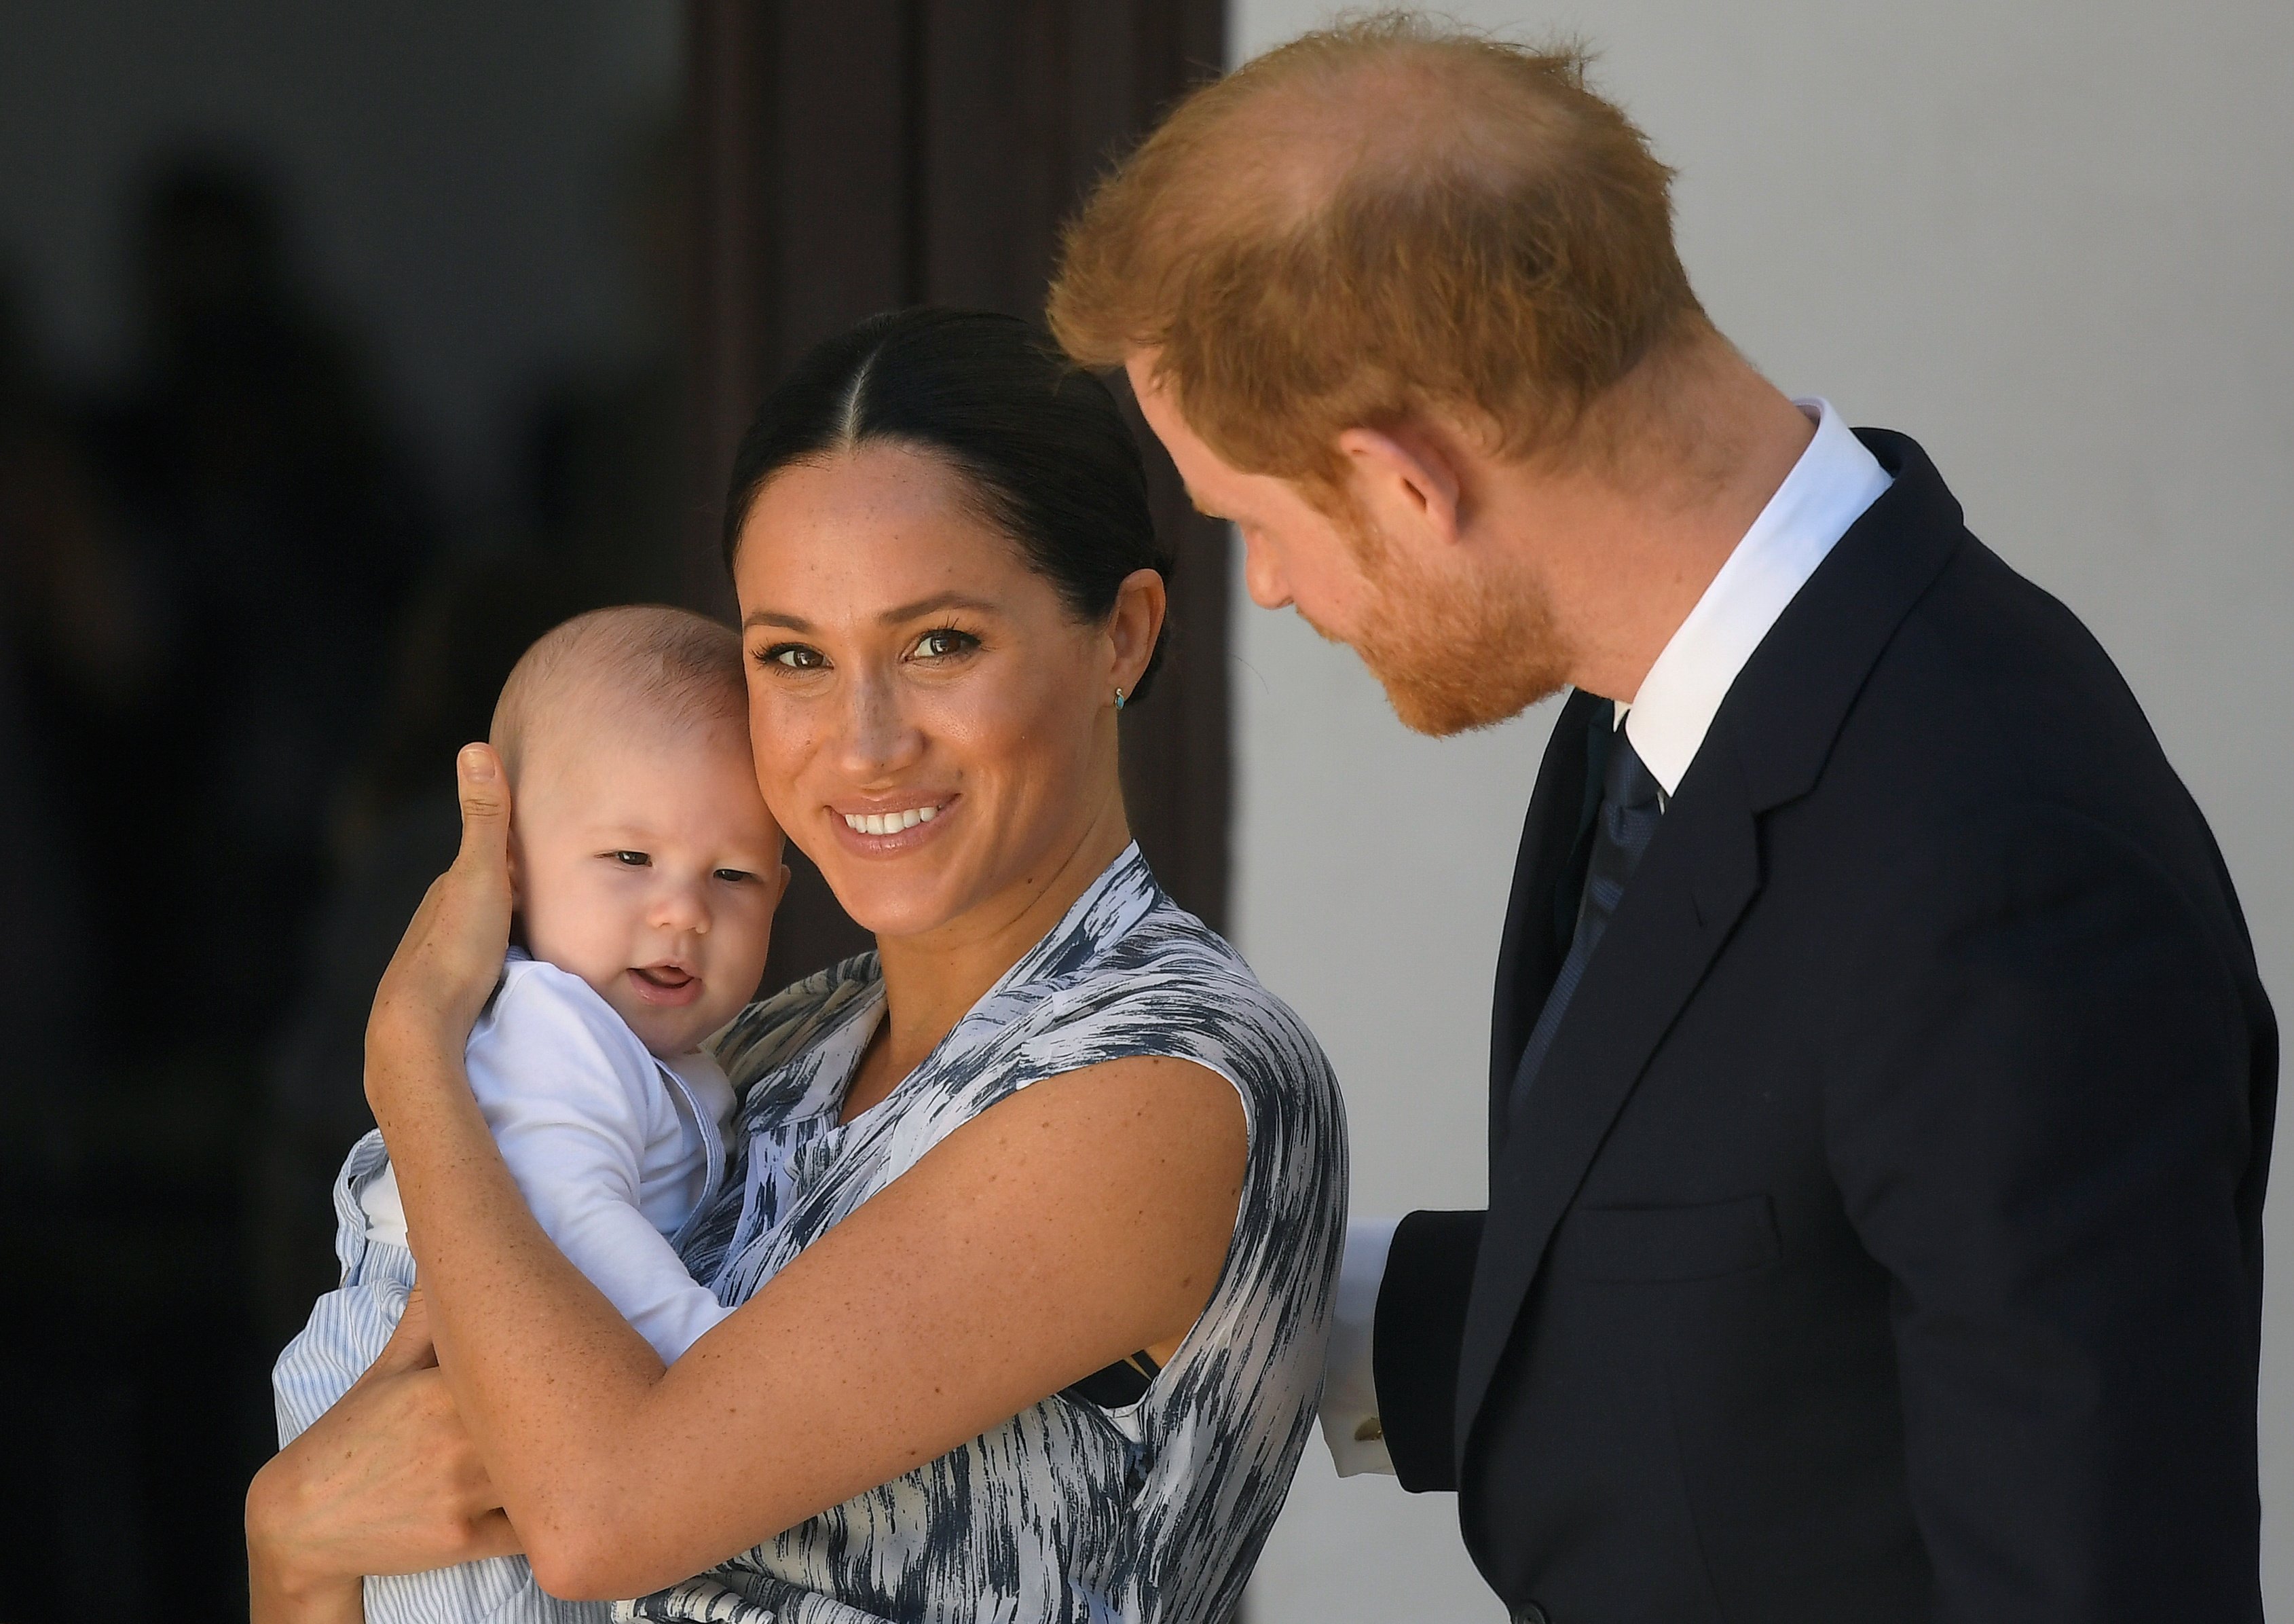 Prince Harry, Duke of Sussex and Meghan, Duchess of Sussex and their son Archie Mountbatten-Windsor in South Africa on September 25, 2019 in Cape Town, South Africa.  |  Source: GettyImage